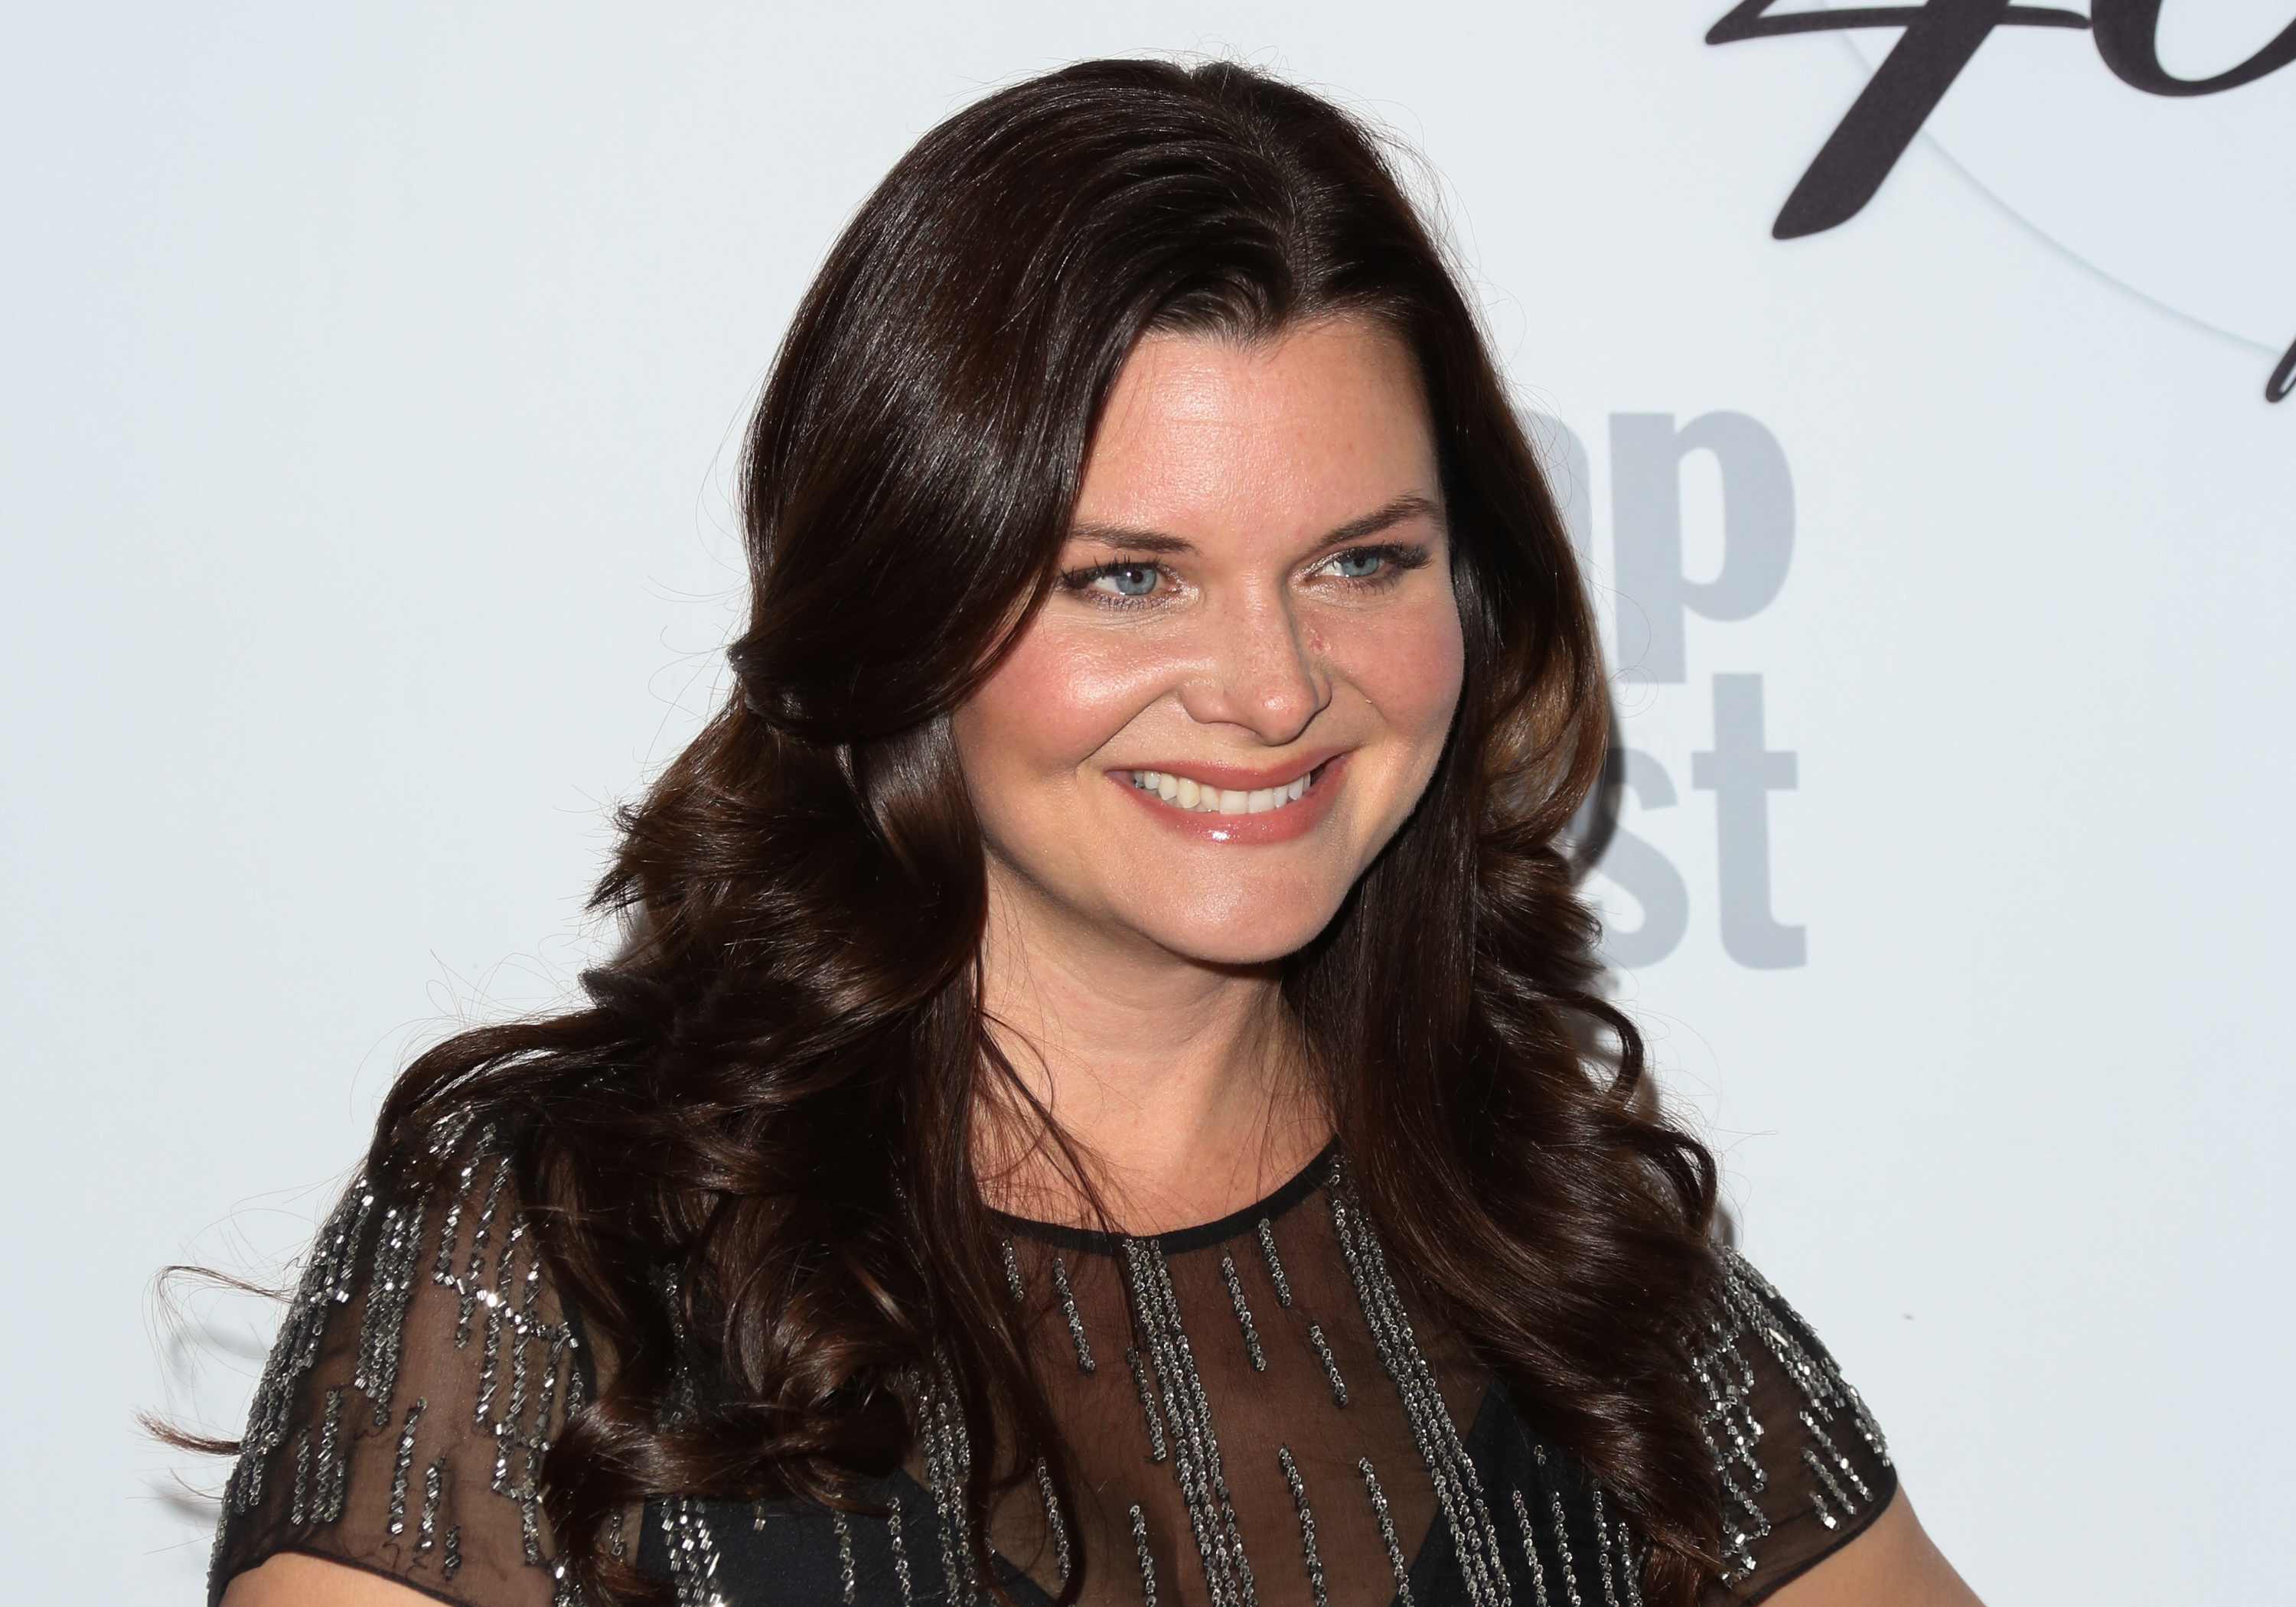 'The Bold and the Beautiful' actor Heather Tom wearing a black sequined dress during a red carpet appearance.